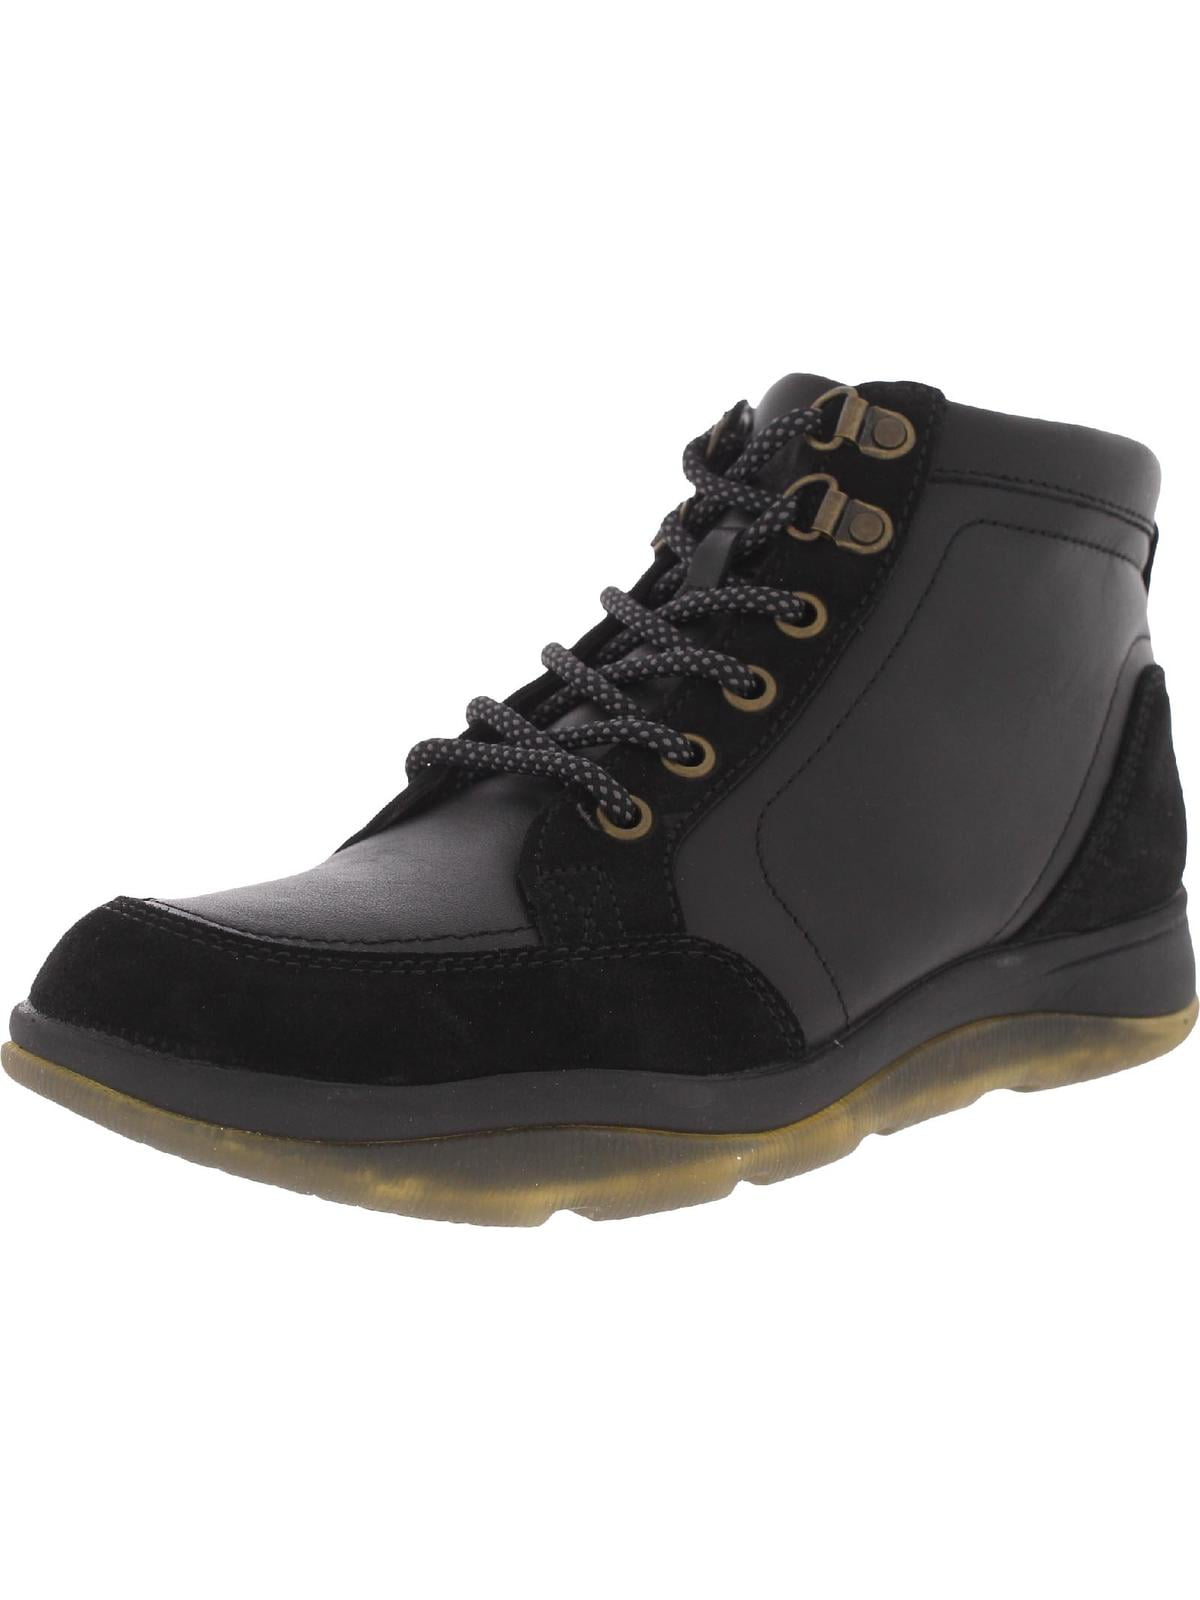 Vionic Women's Whitley Lace-Up Hikers